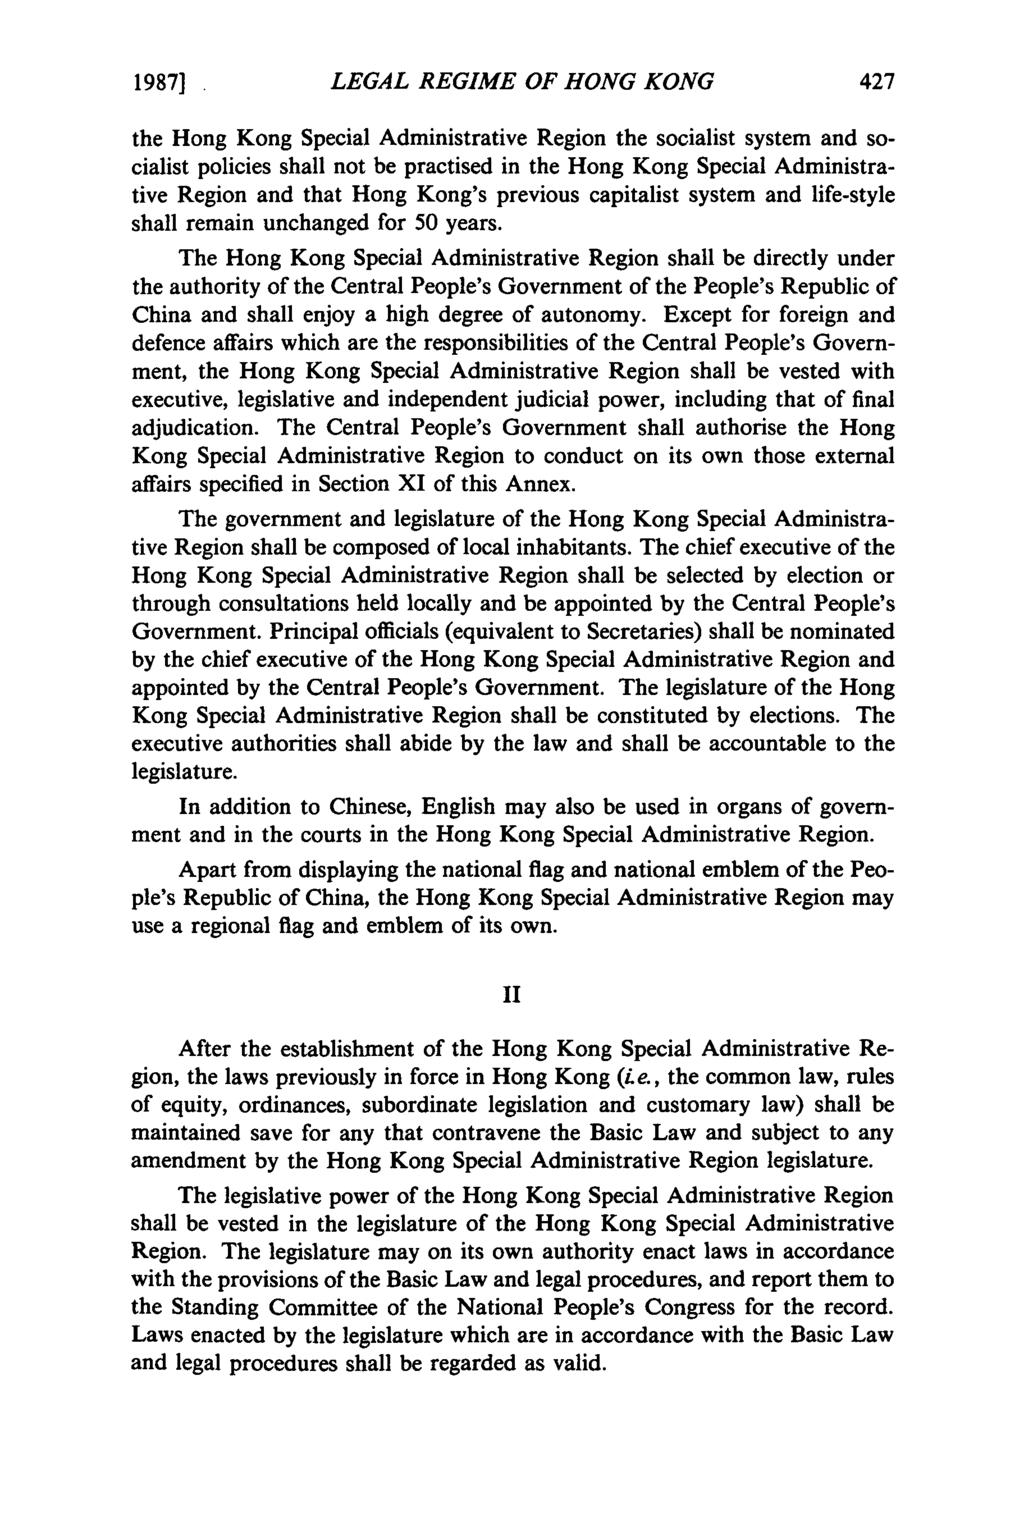 19871 LEGAL REGIME OF HONG KONG the Hong Kong Special Administrative Region the socialist system and socialist policies shall not be practised in the Hong Kong Special Administrative Region and that